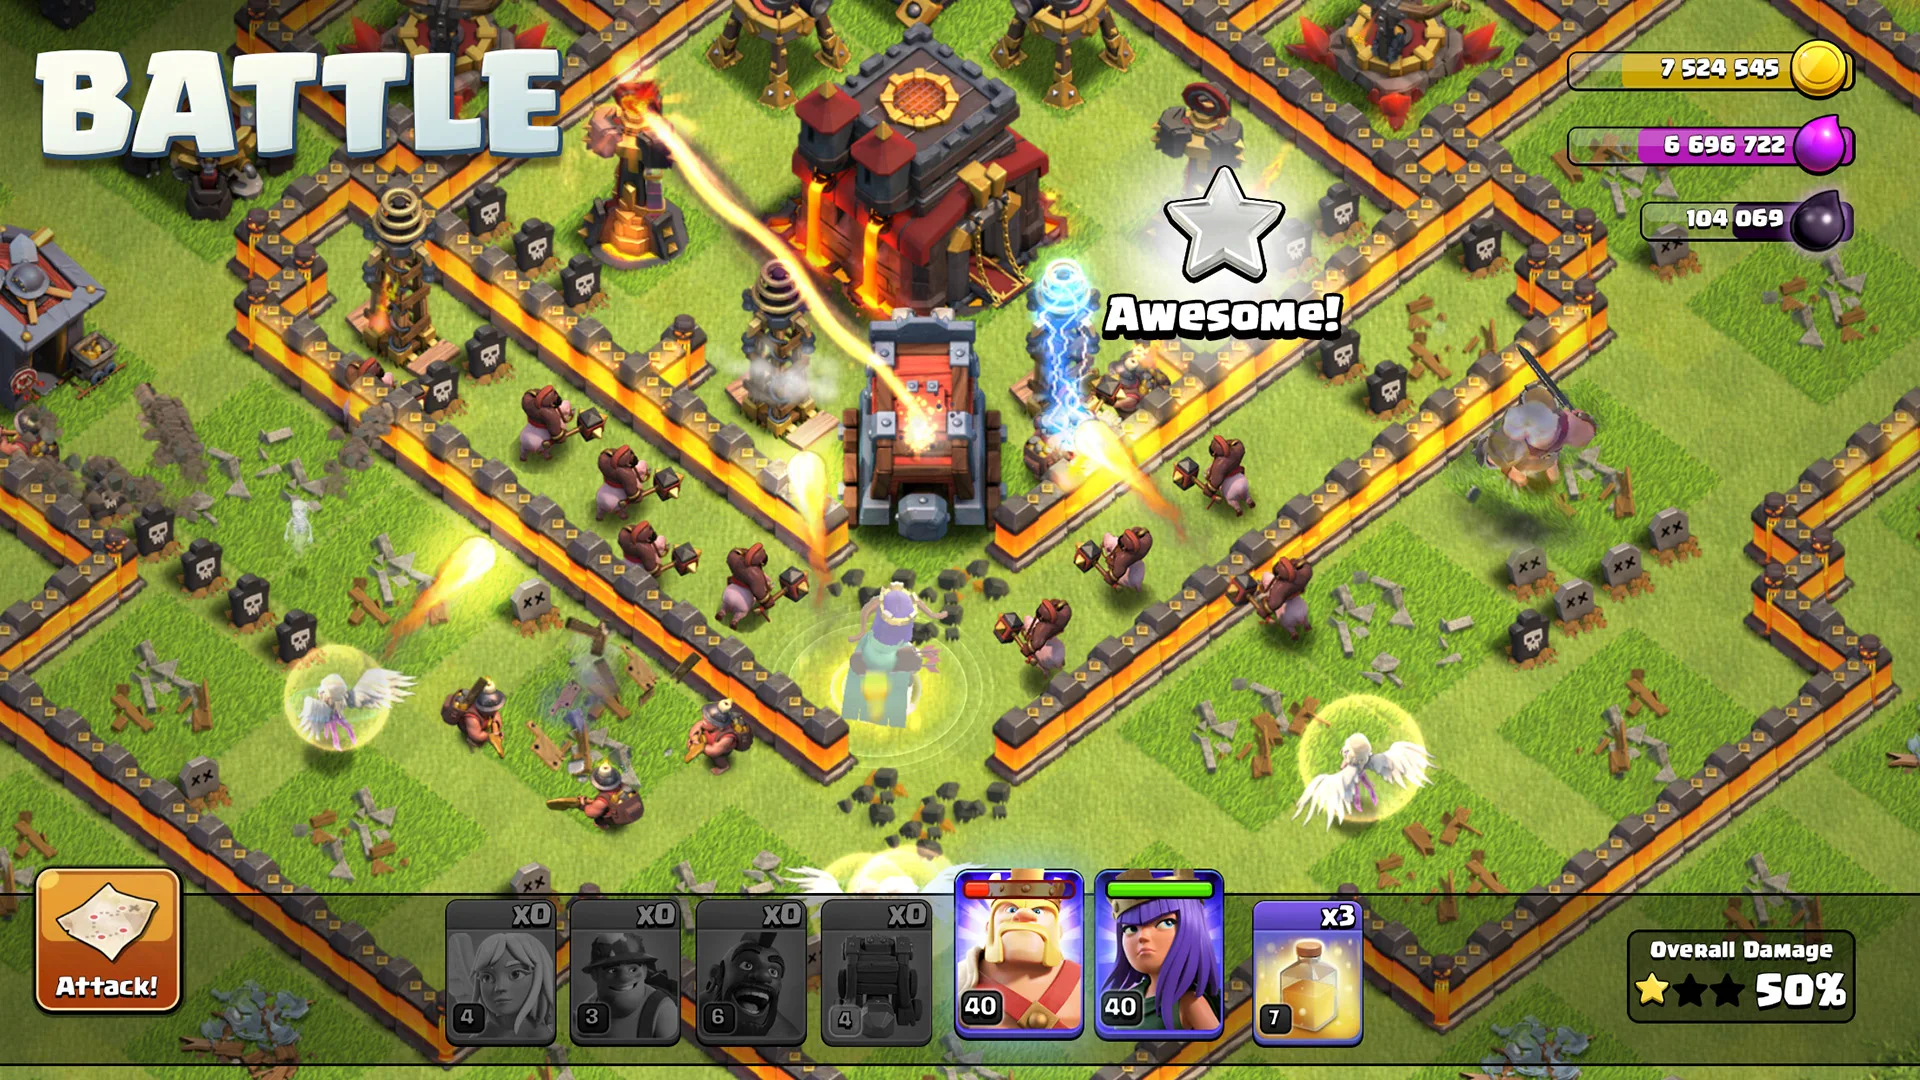 Clash of Kings v9.11.0 MOD APK (Unlimited Money and Gold)